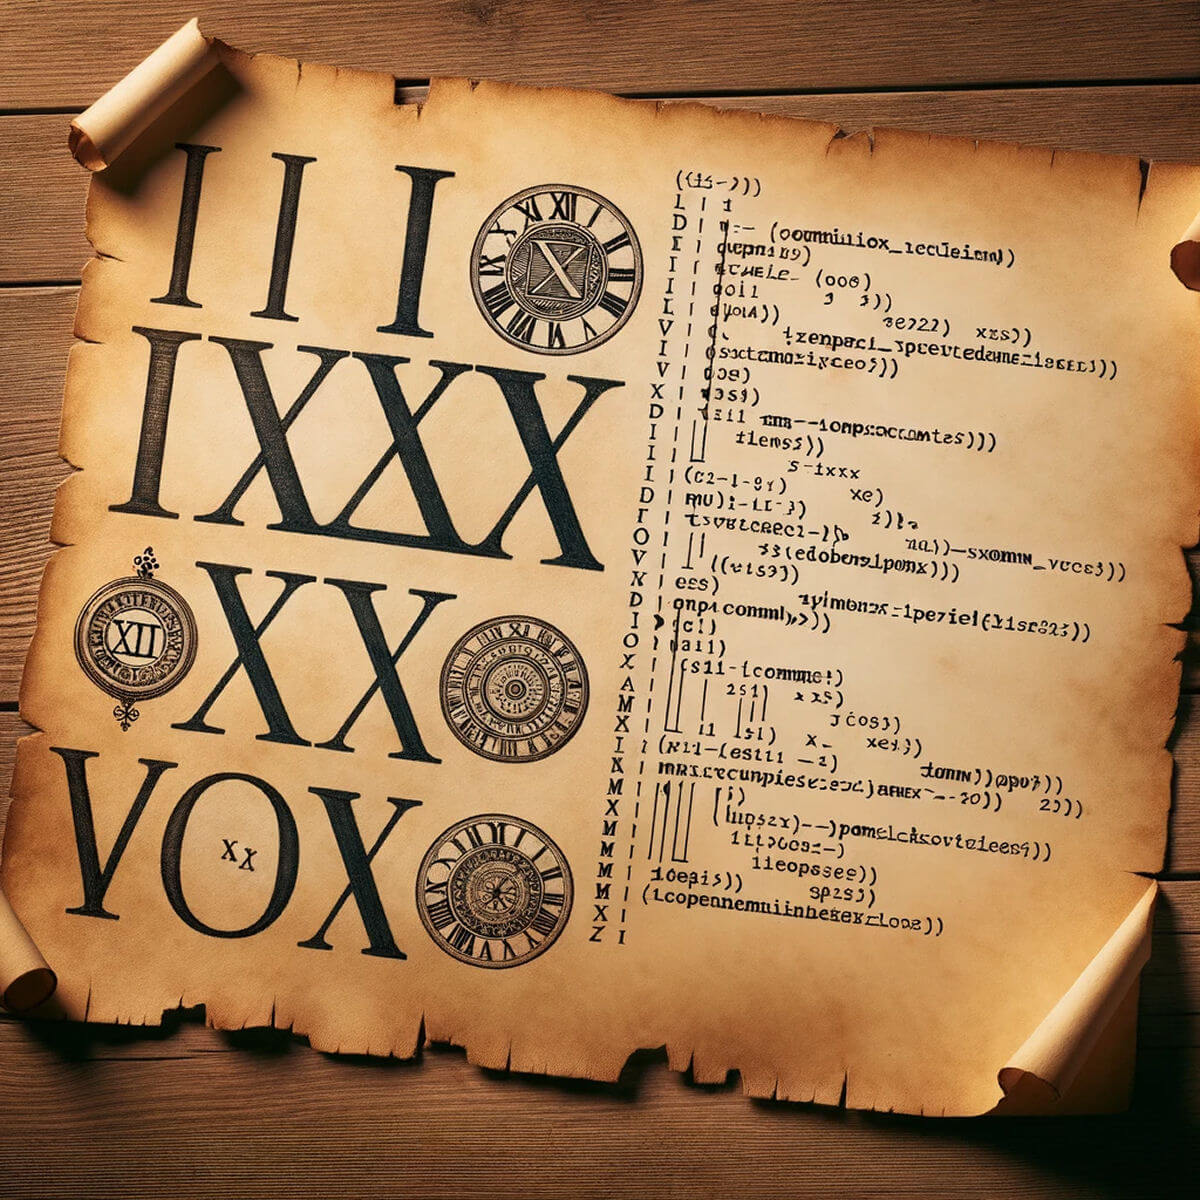 Roman numerals and computer code side by side written on old parchment